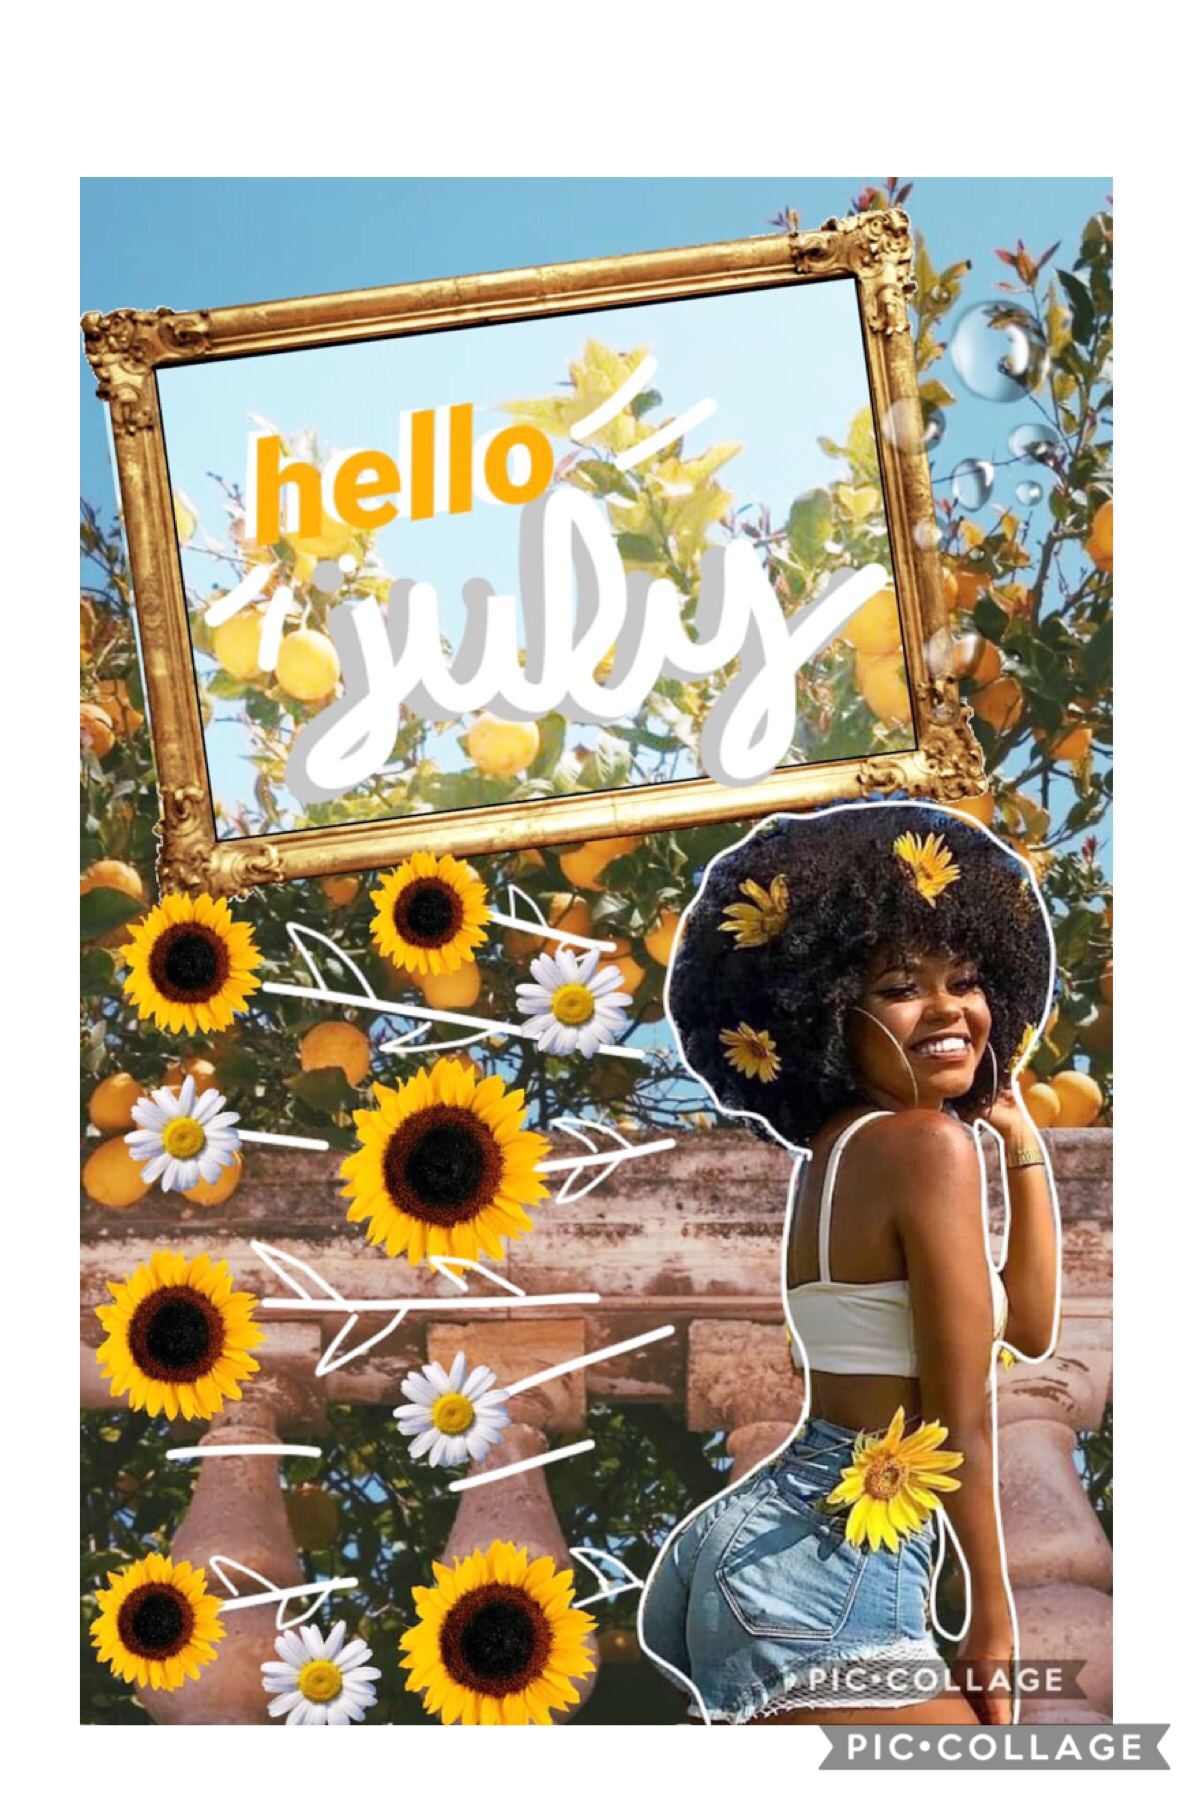 🌻tap🌻

how is everyone today 🌻🌿💫
comment fun emojis💛👌🌈
#FEATURETHIS #pconly #summer #hellojuly #piccollage #july 